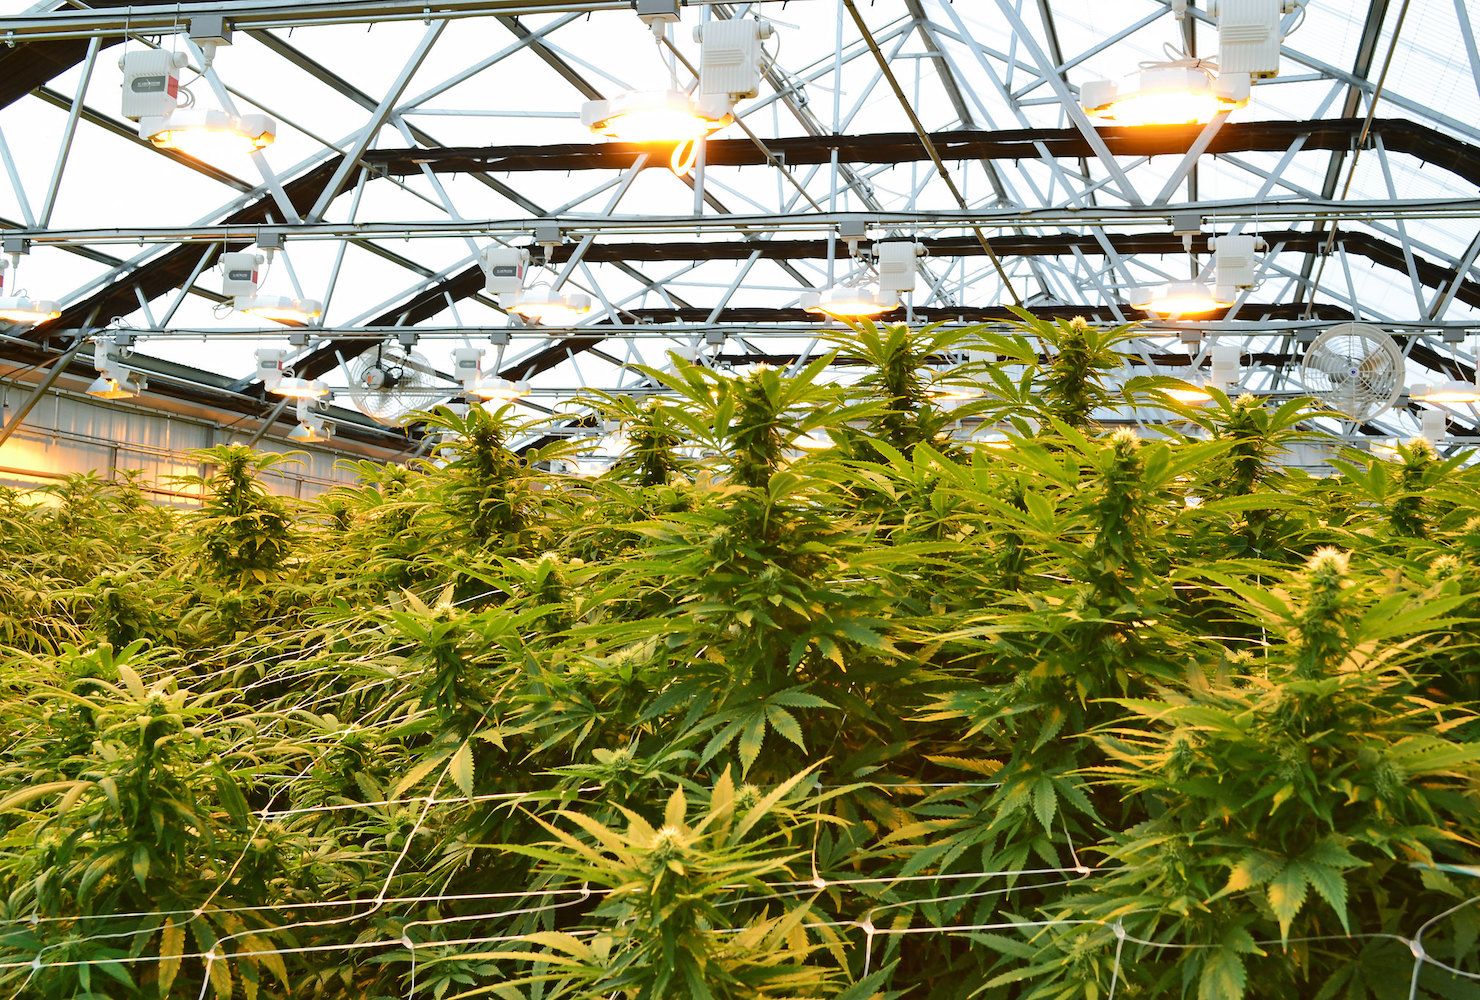 Cannabis plants growing indoors. Credit: Oregon Department of Agriculture / Flickr, June 2019